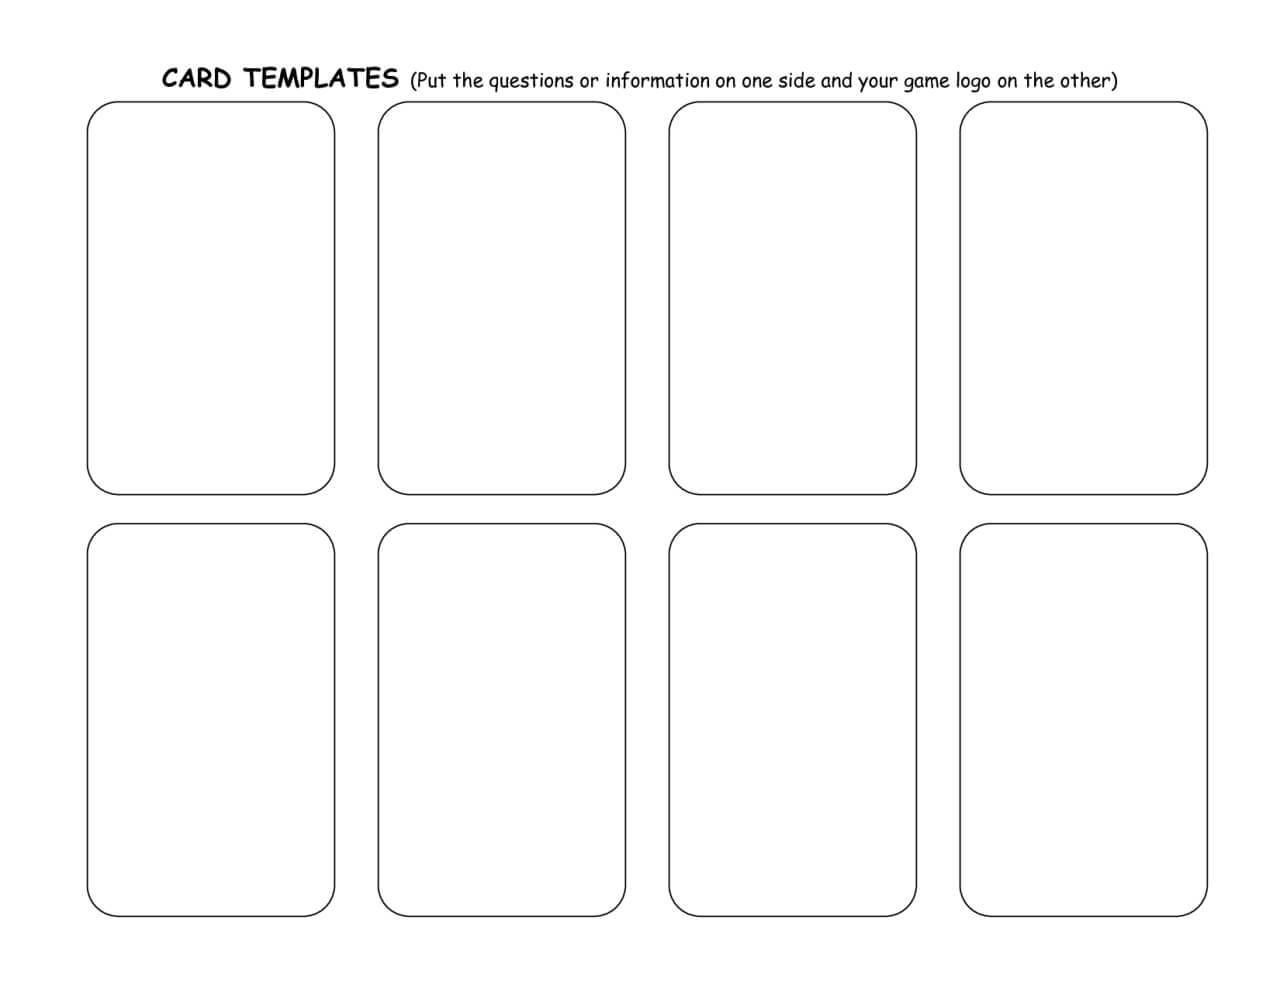 Trading Card Game Template - Free Download In 2019 | Trading With Playing Card Template Word